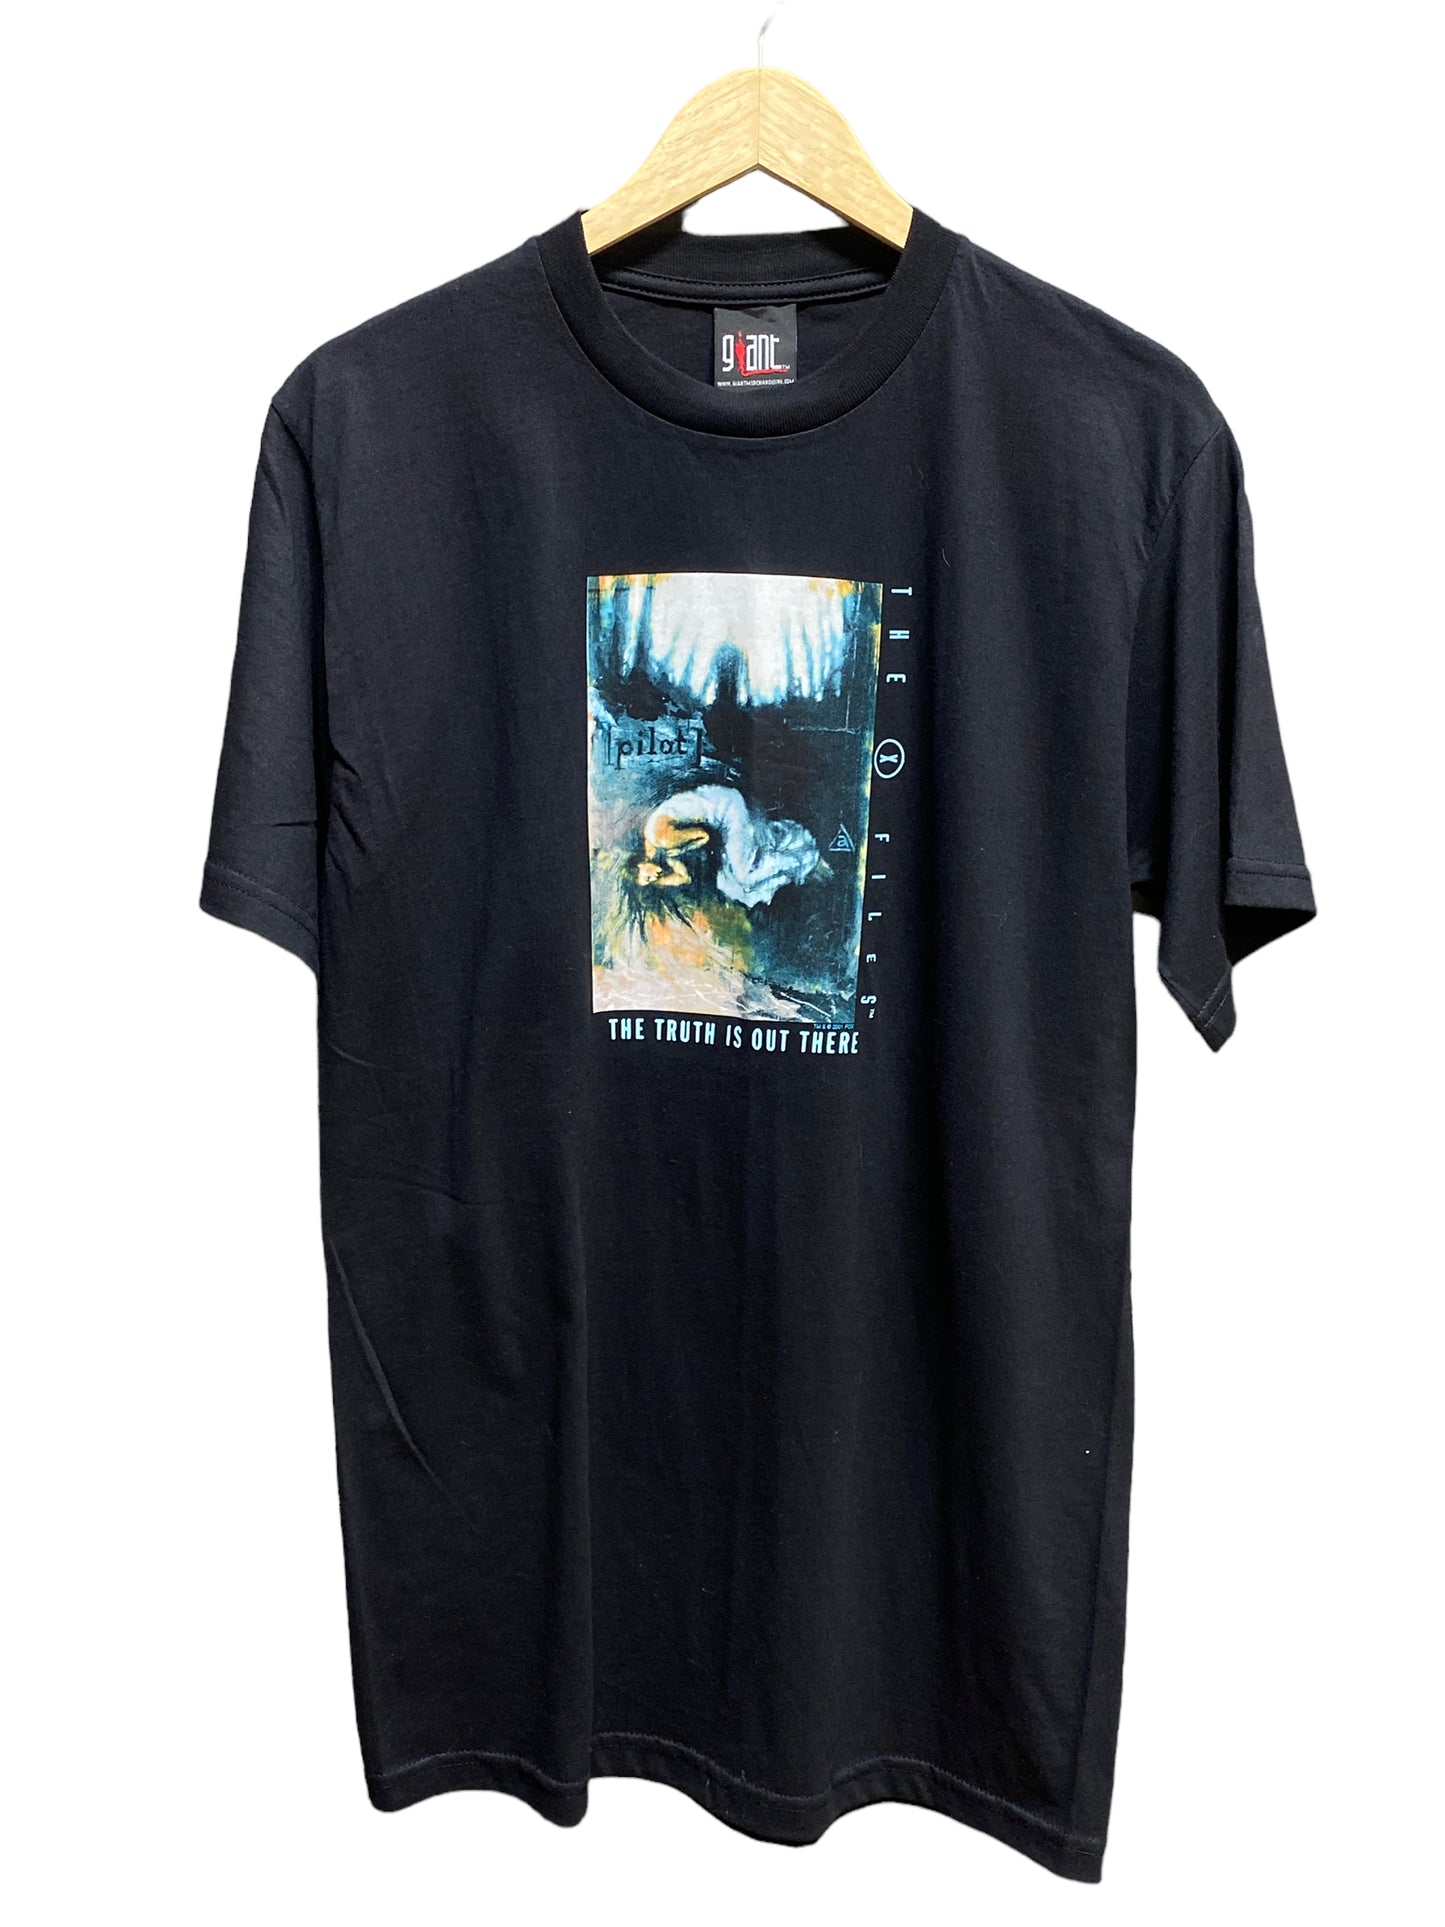 2001 Giant X-Files Truth is Out There Promo Tee Size Medium